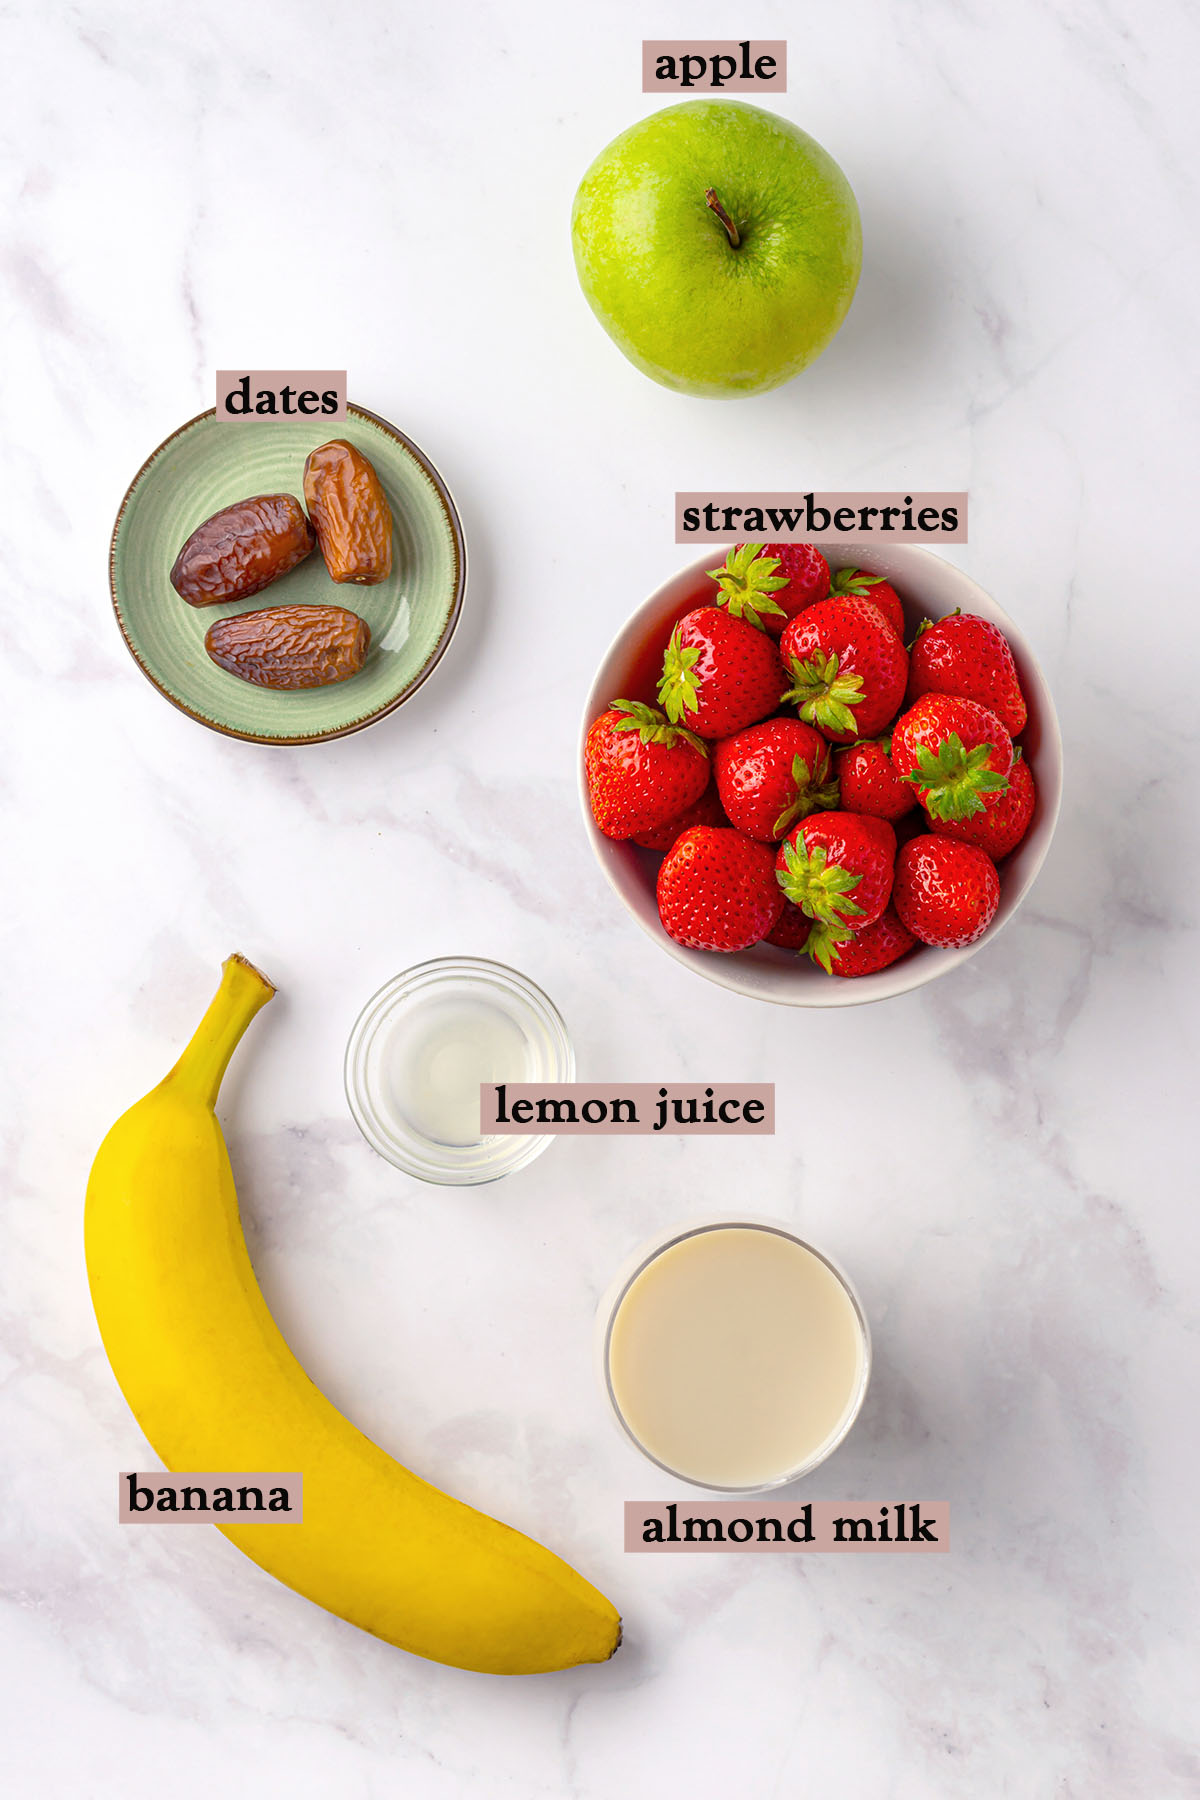 Ingredients for strawberry apple smoothie